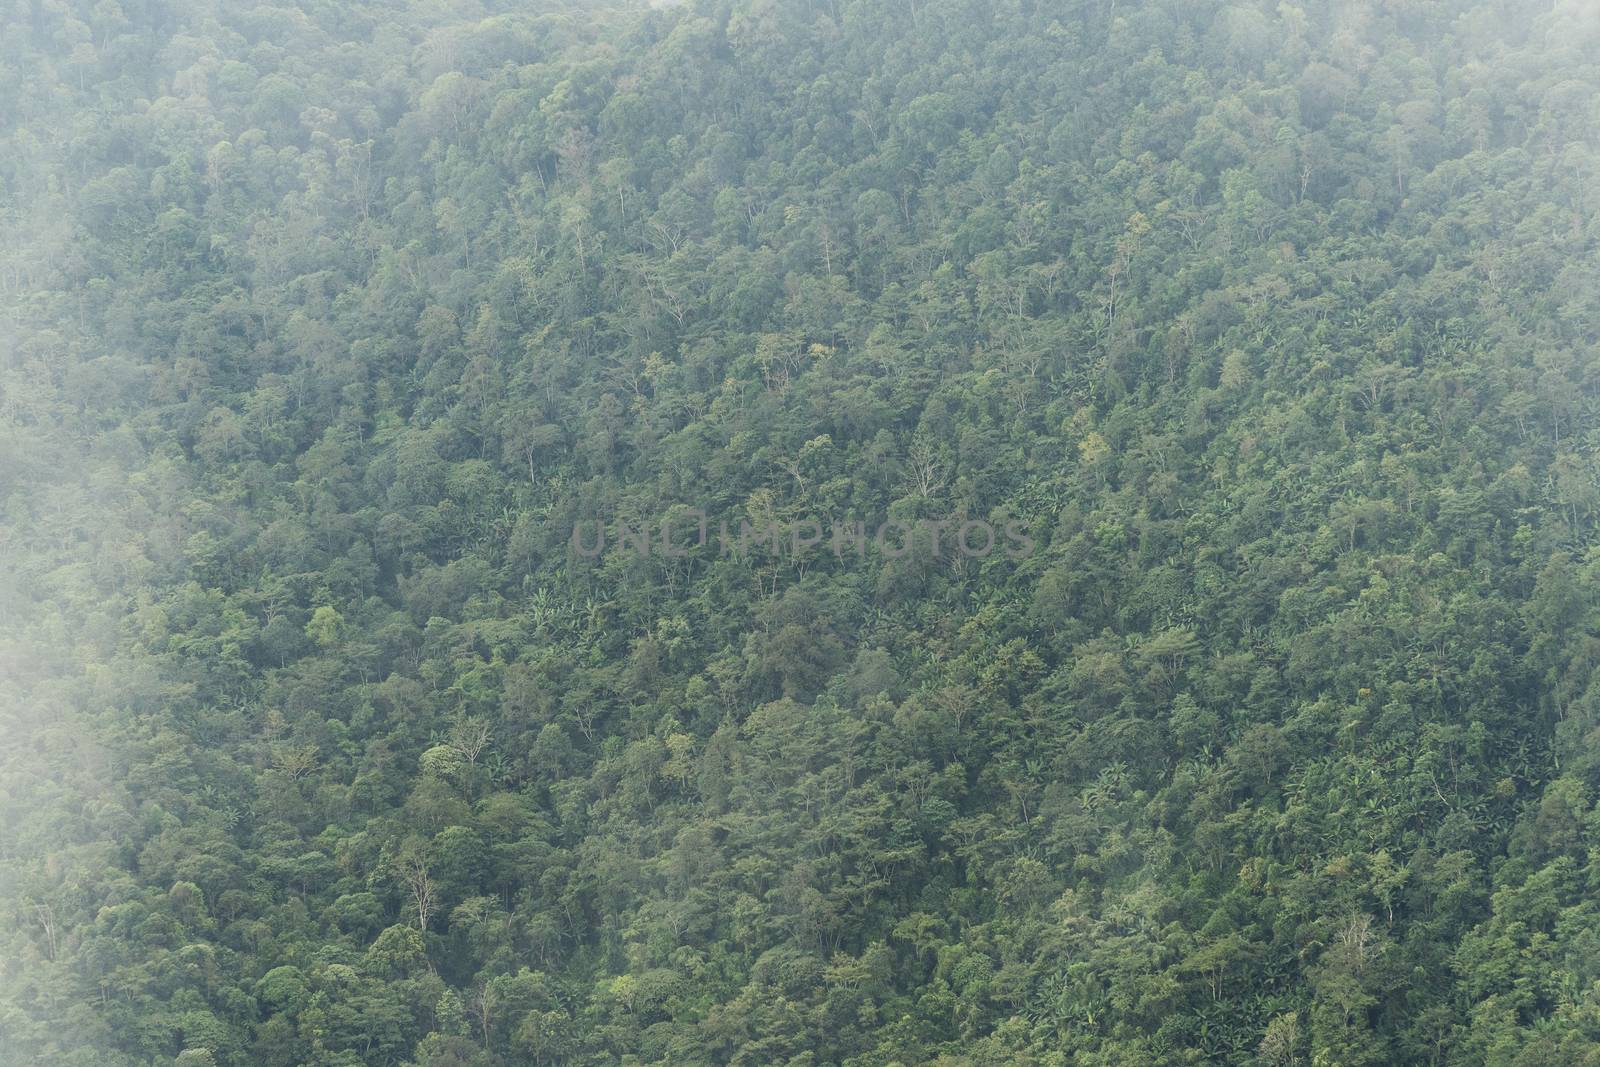 Tree surface on the mountain and fog